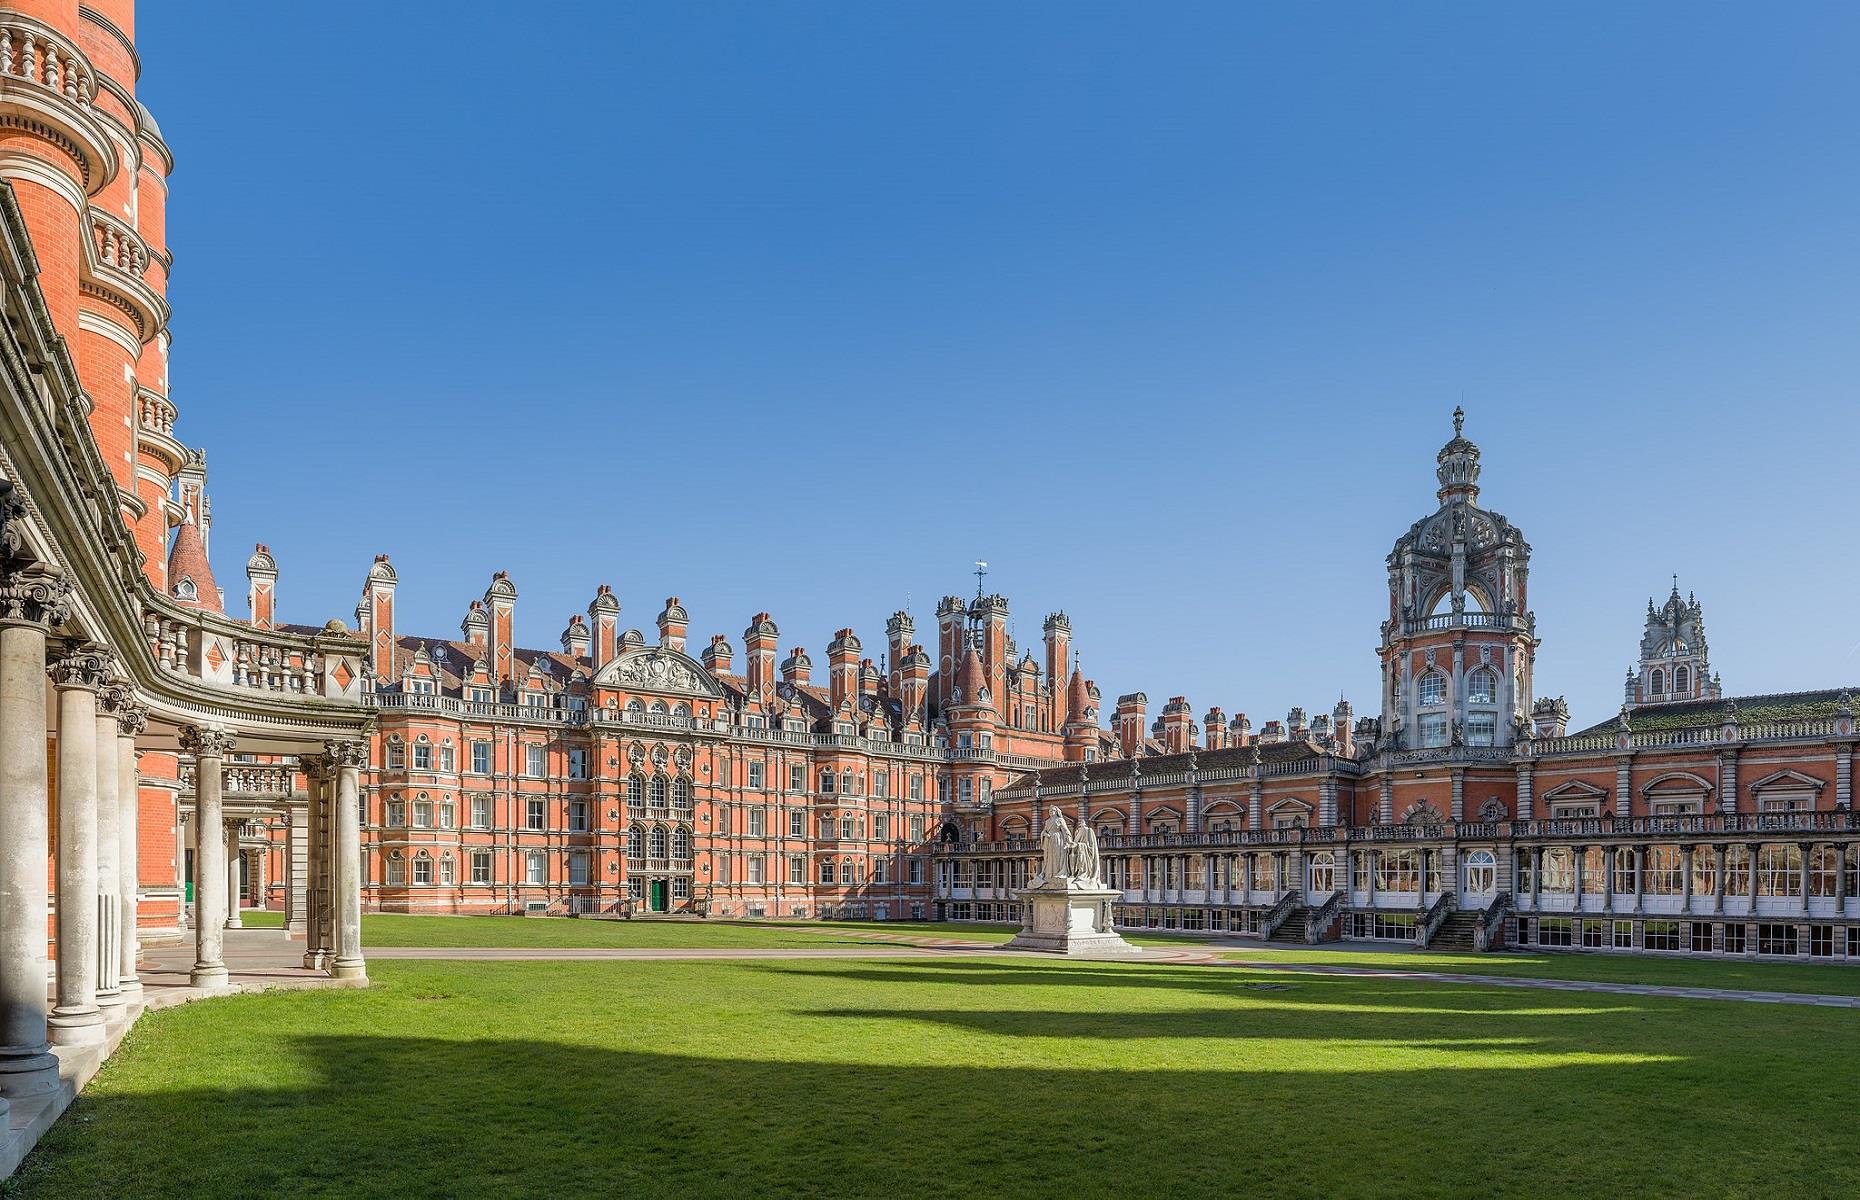 <p>As iconic as is it spectacular, Royal Holloway, part of the University of London, can be found in Surrey, UK, and was founded in 1879. The institution was among the first in Britain to allow women to access higher education. The Founder's Building was unveiled by Queen Victoria in 1886 and it remains the hub of the campus to this day. Highlights include the Royal Holloway Chapel and the Picture Gallery, which contains a fine collection of Victorian paintings. Guided tours are usually available, but <a href="https://www.royalholloway.ac.uk/student-life/visit-royal-holloway/book-a-campus-tour/">check the website</a> for updates.</p>